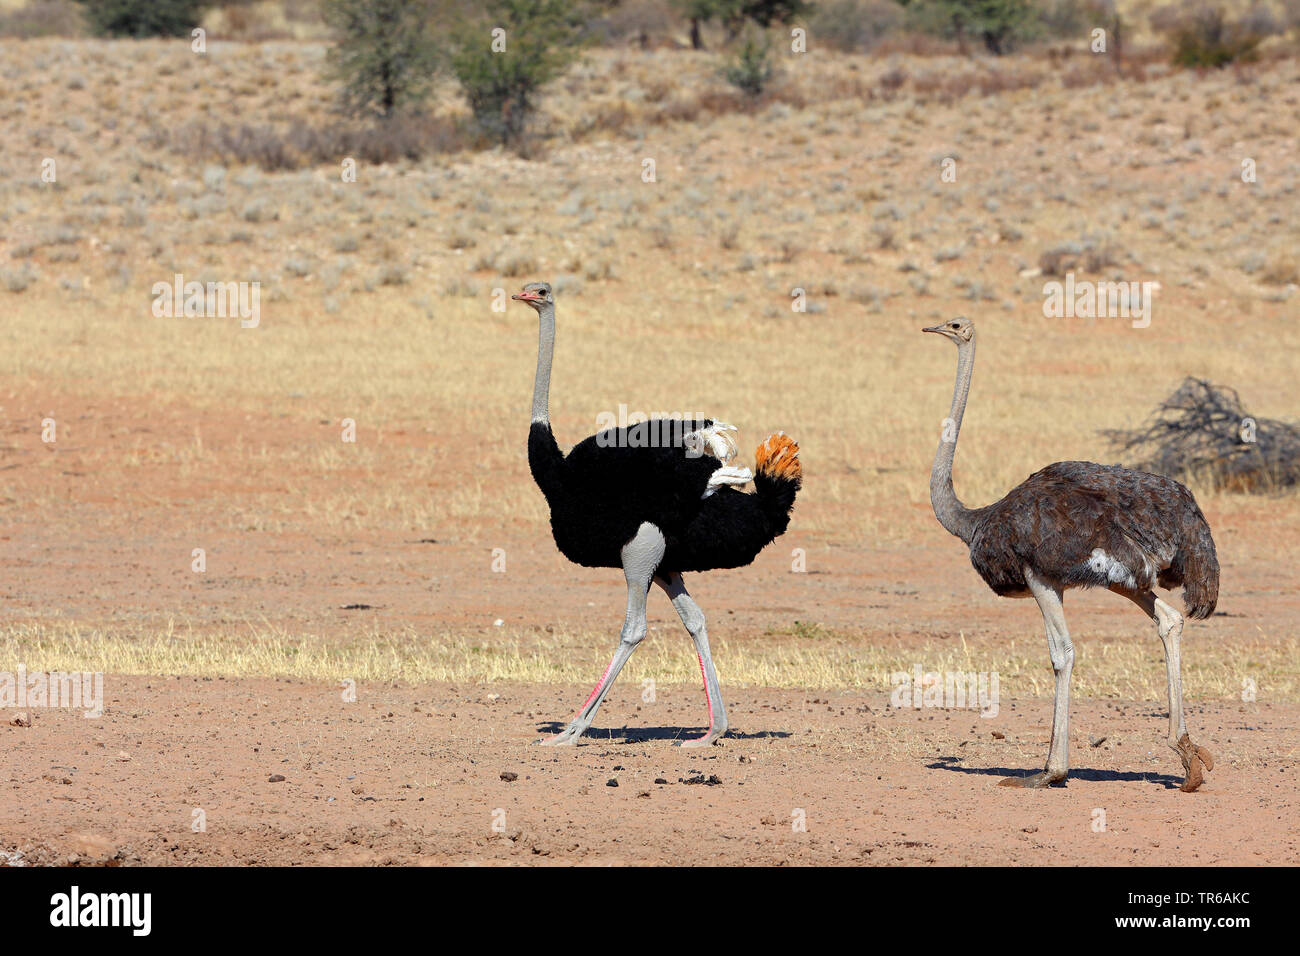 ostrich (Struthio camelus), pair walking in savannah, South Africa, Kgalagadi Transfrontier National Park Stock Photo